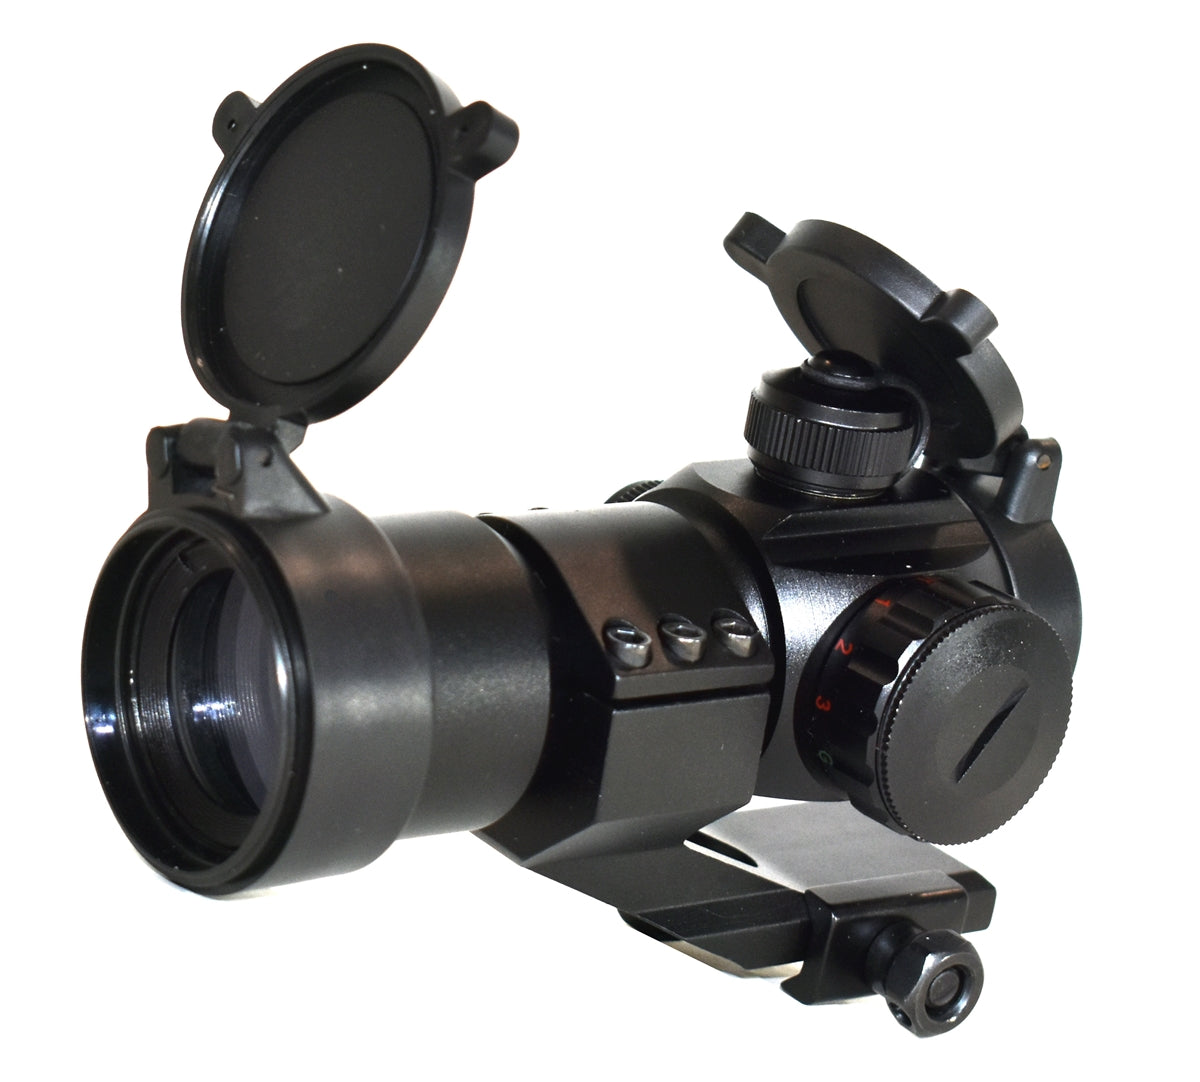 Tactical Red Green Blue Dot Sight Picatinny Style Compatible With Rifles.